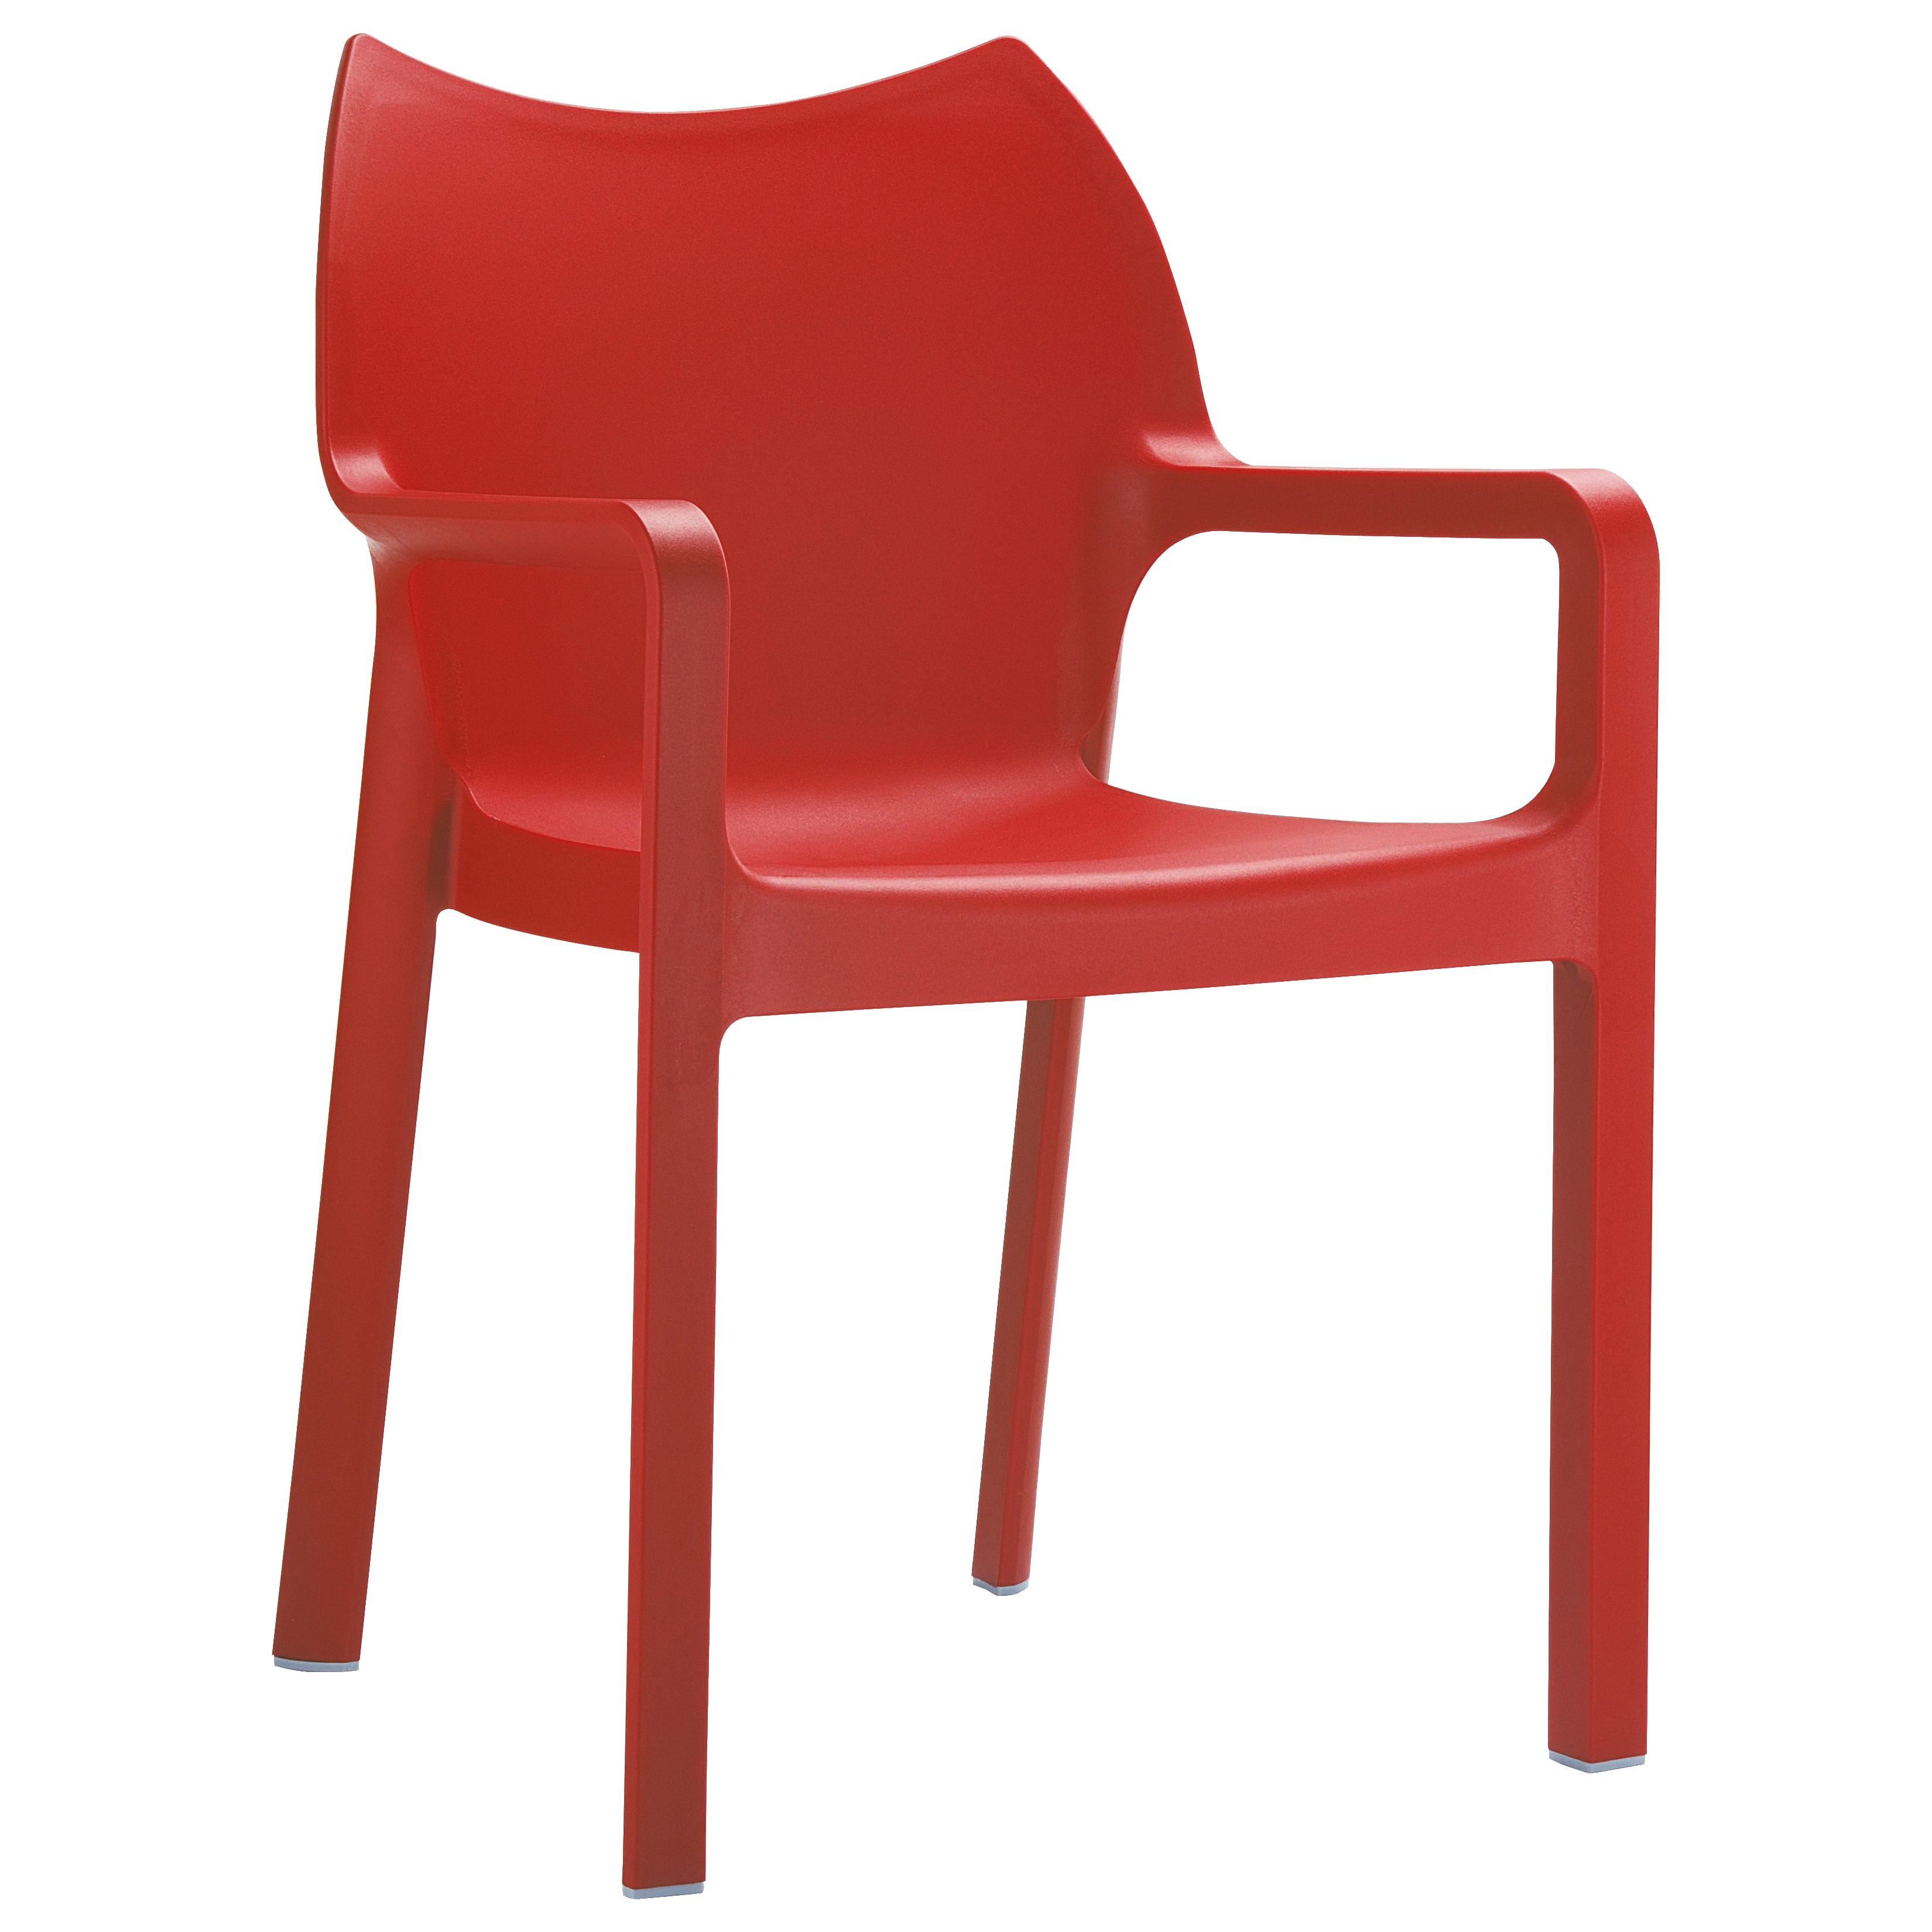 Red Outside Chairs : See more of red chair on facebook. - fanficisatkm53